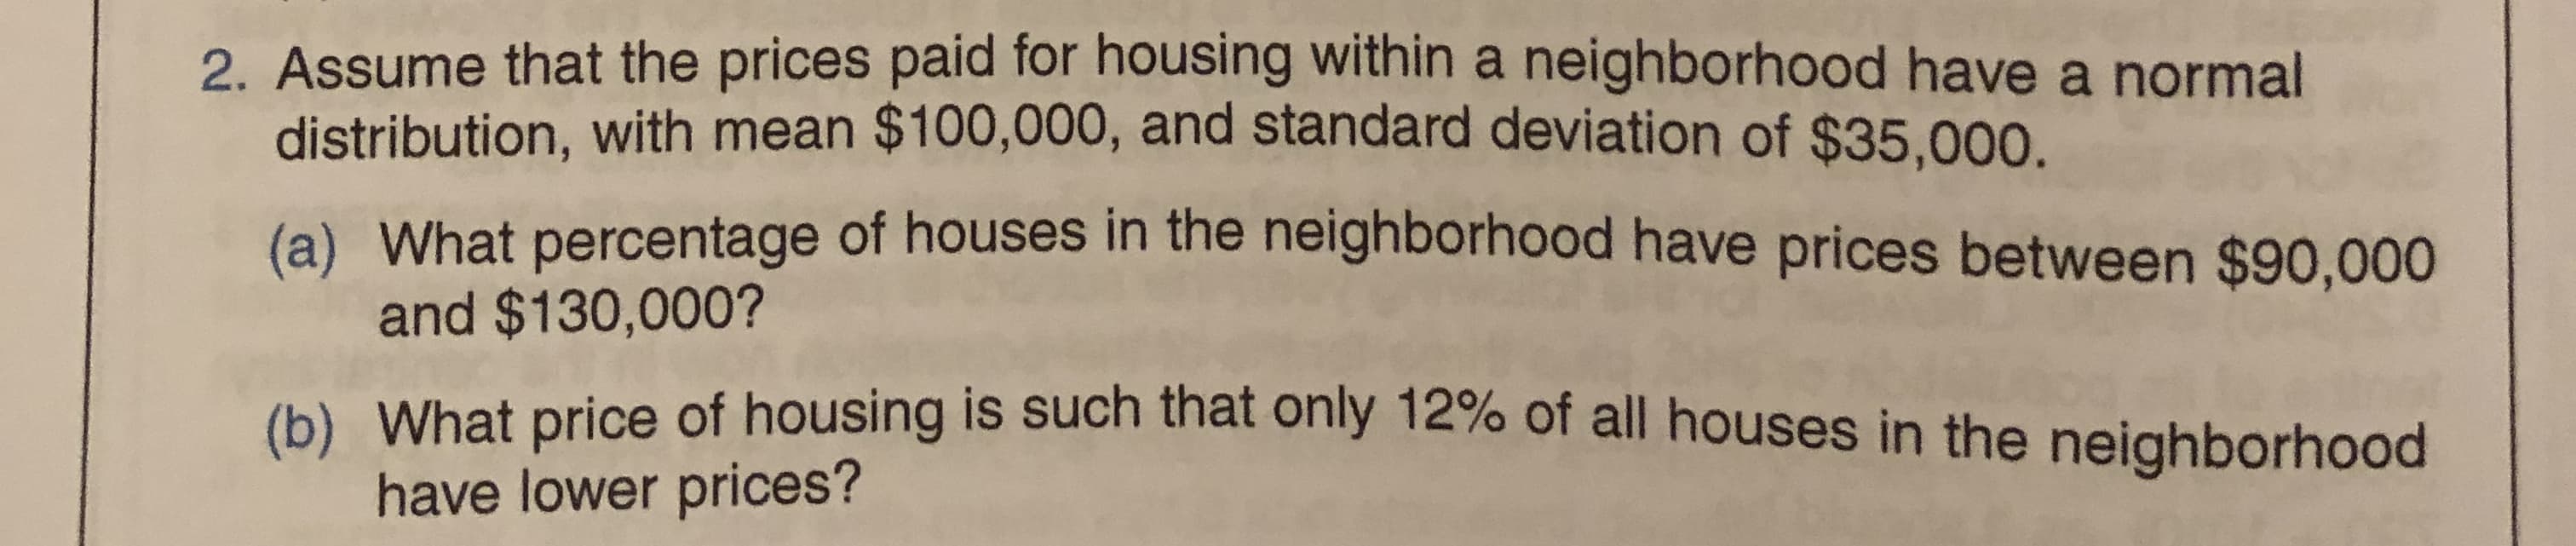 2. Assume that the prices paid for housing within a neighborhood have a normal
distribution, with mean $100,000, and standard deviation of $35,000.
(a) What percentage of houses in the neighborhood have prices between $90,000
and $130,000?
(b) What price of housing is such that ônly 12% of all houses in the neighborhood
have lower prices?
